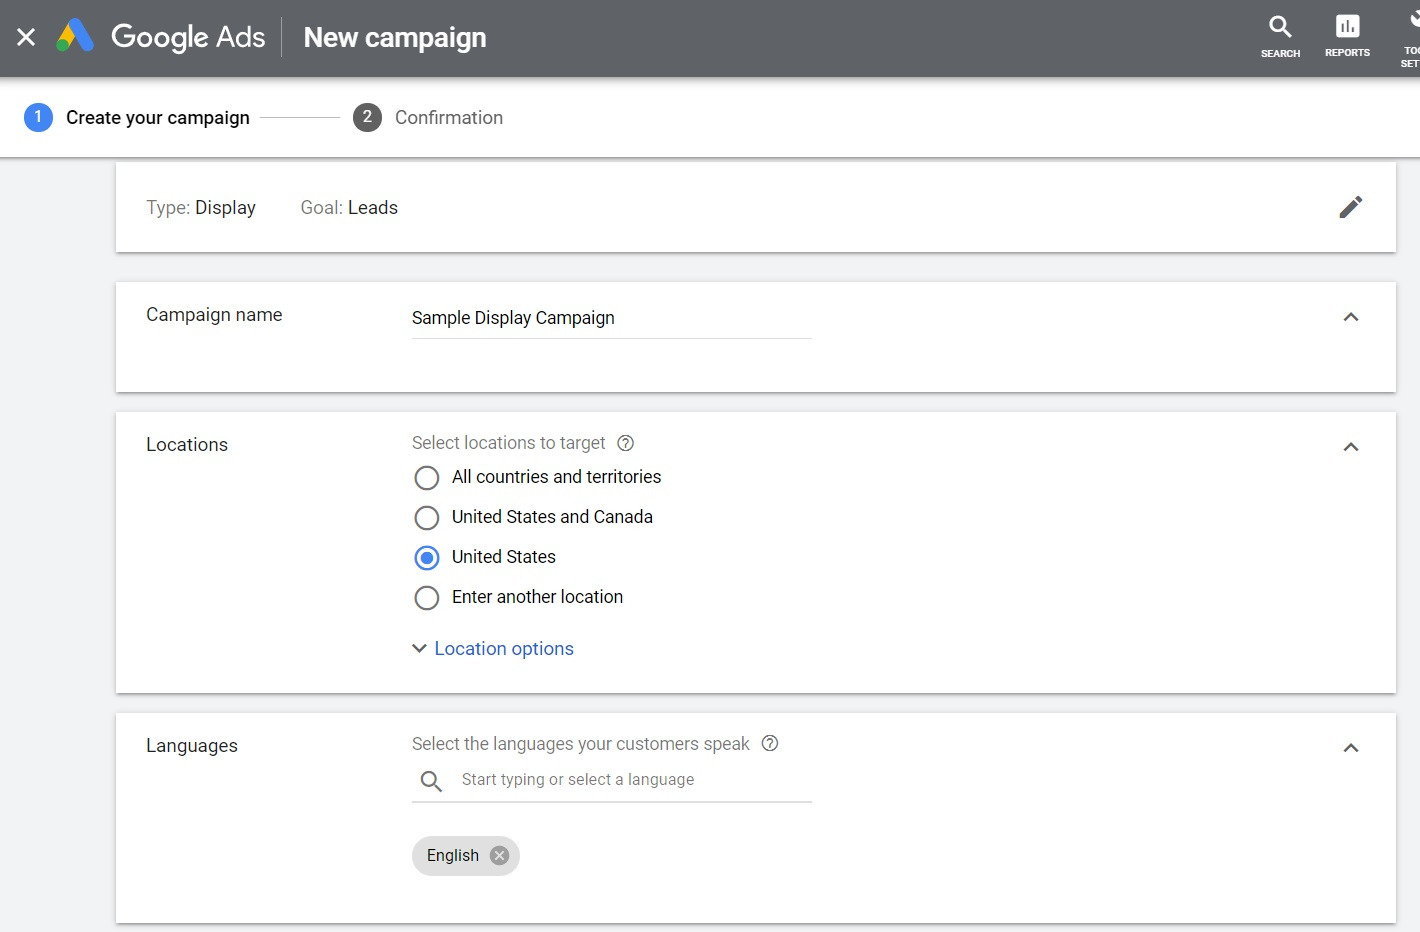 Step 2: Set up the campaign - Google Display ads